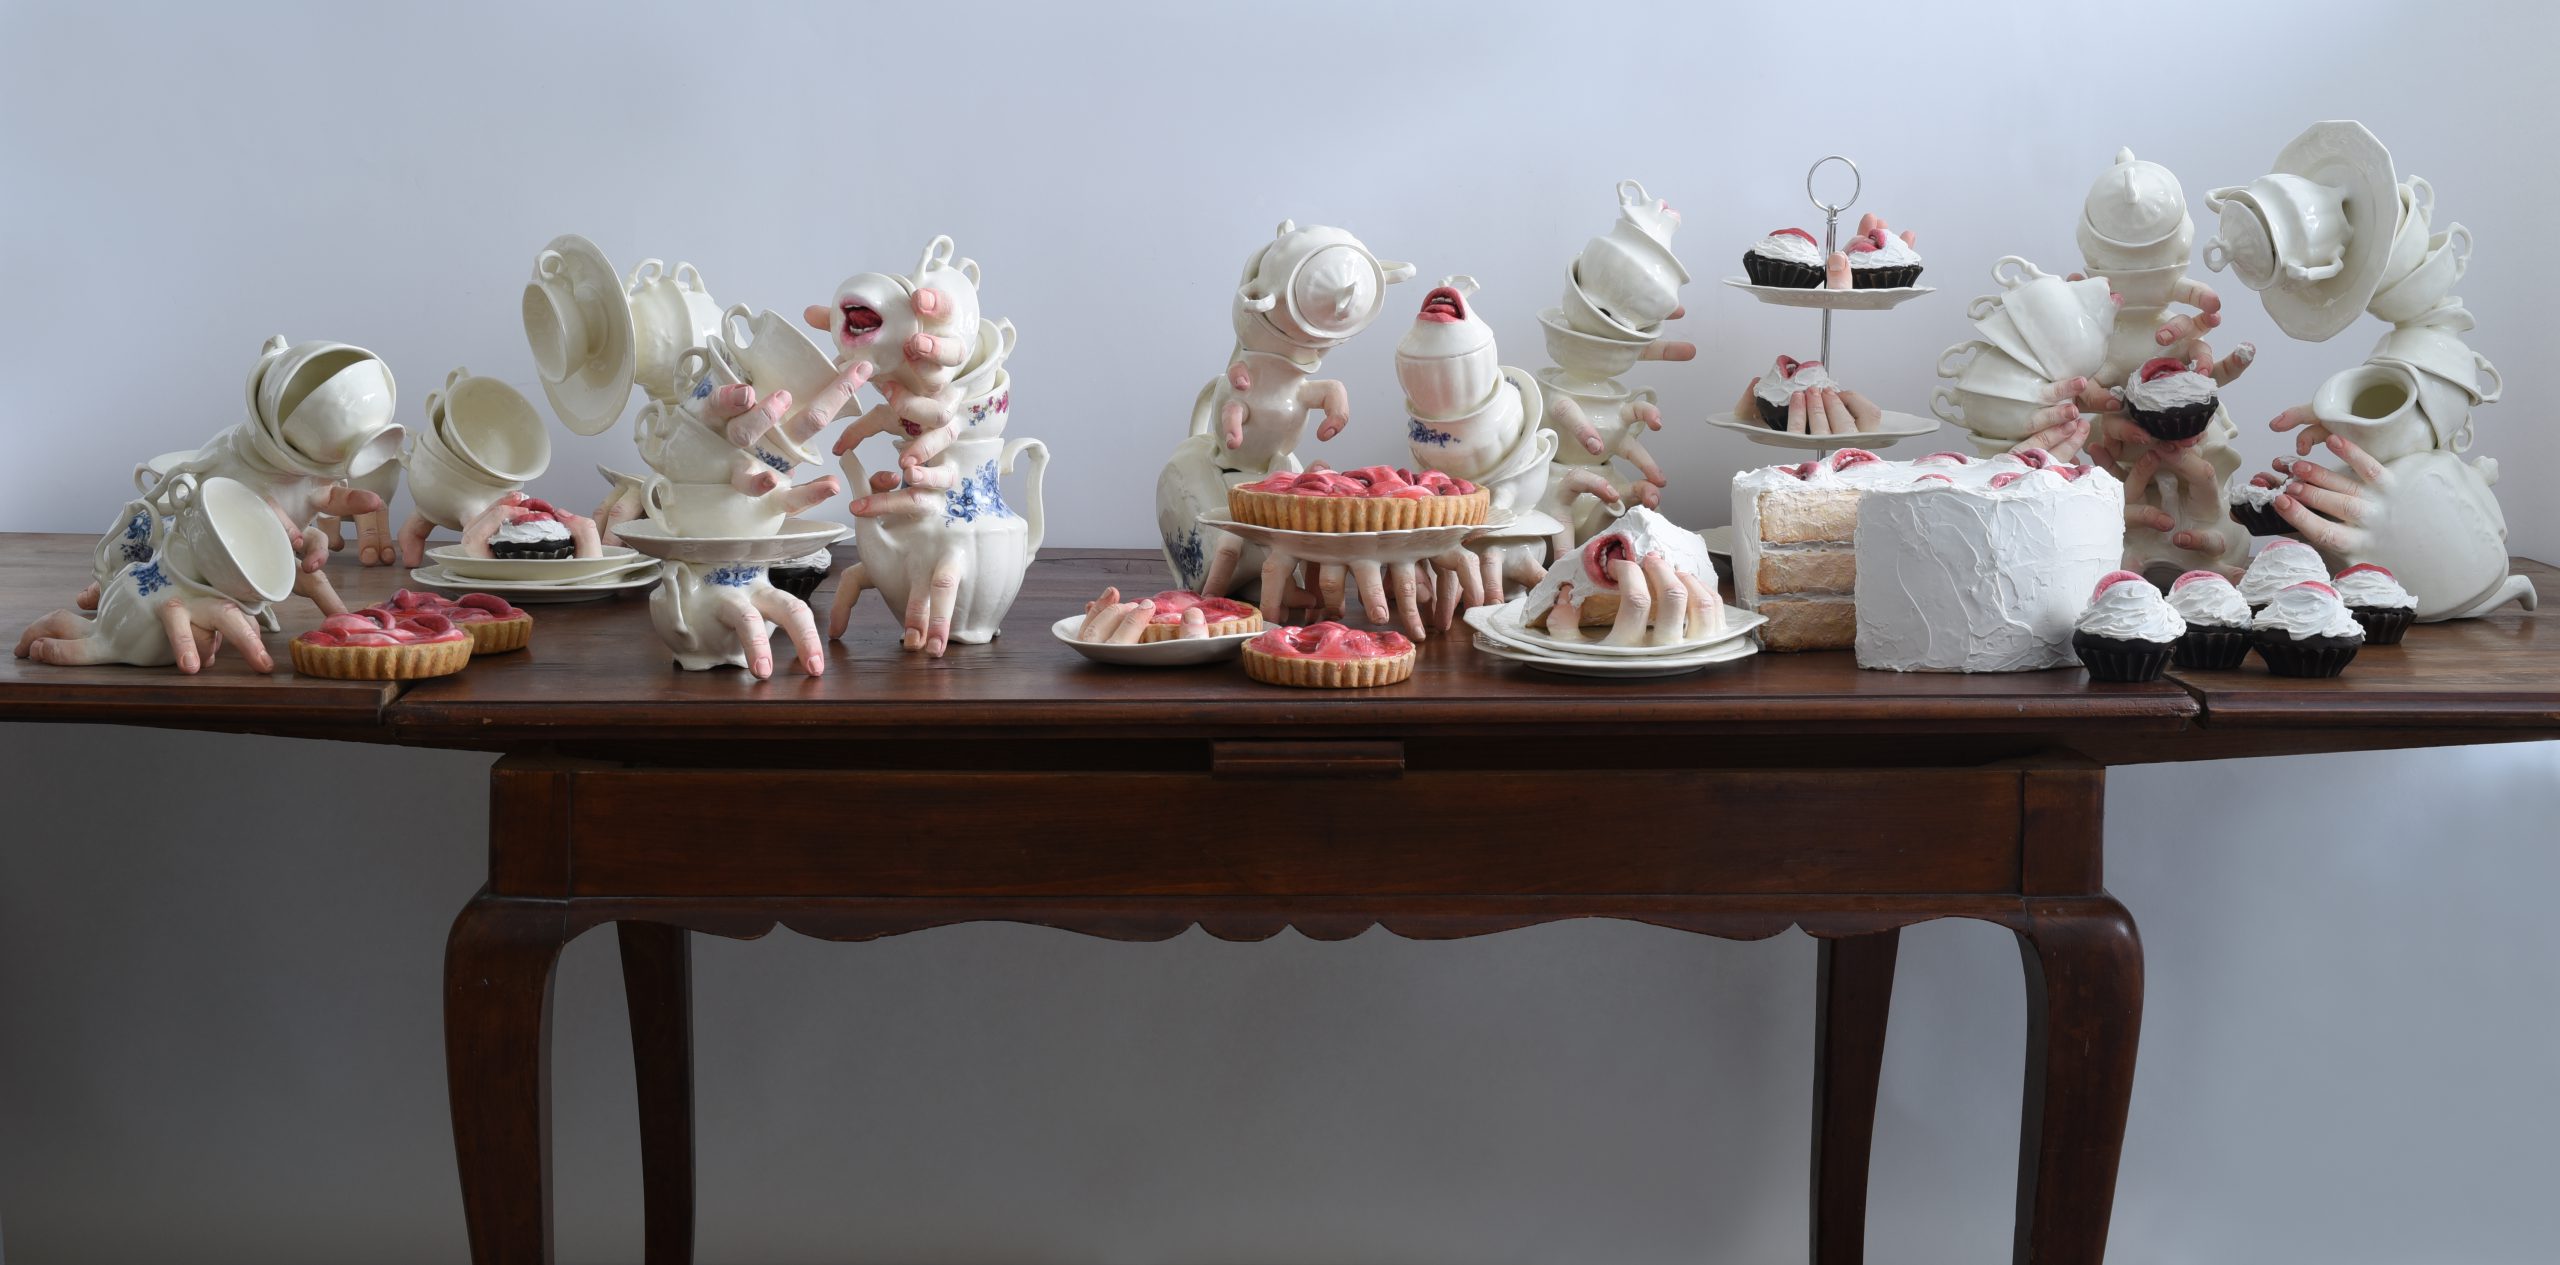 Ronit Baranga - All Things Sweet and Painful, Installation view at Beinart Gallery, Melbourne, 2020